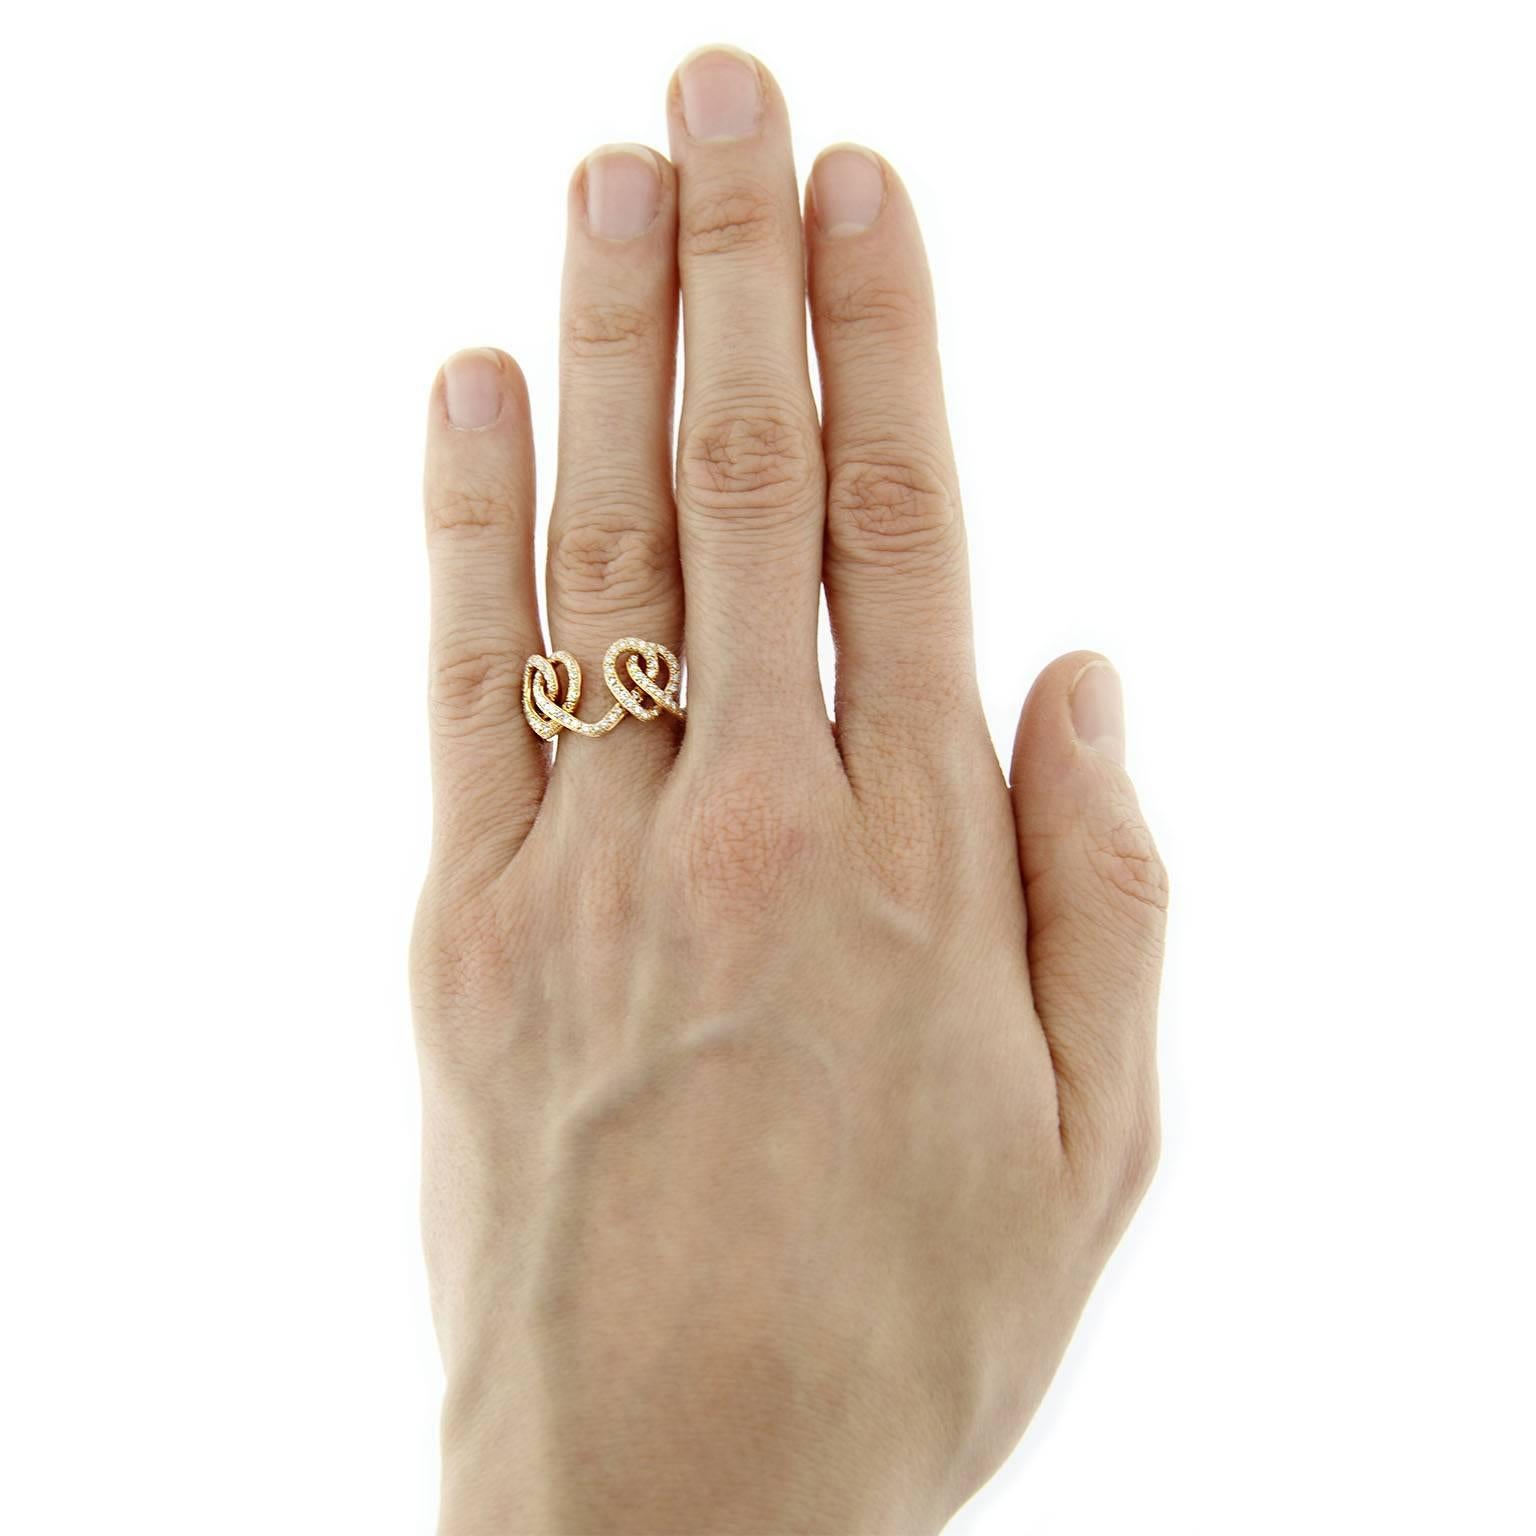 Jona design collection, hand crafted in Italy, 18 karat yellow gold intersecting open heart ring, set with 0.39 carats of white diamonds, F color, VS1 clarity.  US size 6.5. Can be sized to any specification. 
All Jona jewelry is new and has never